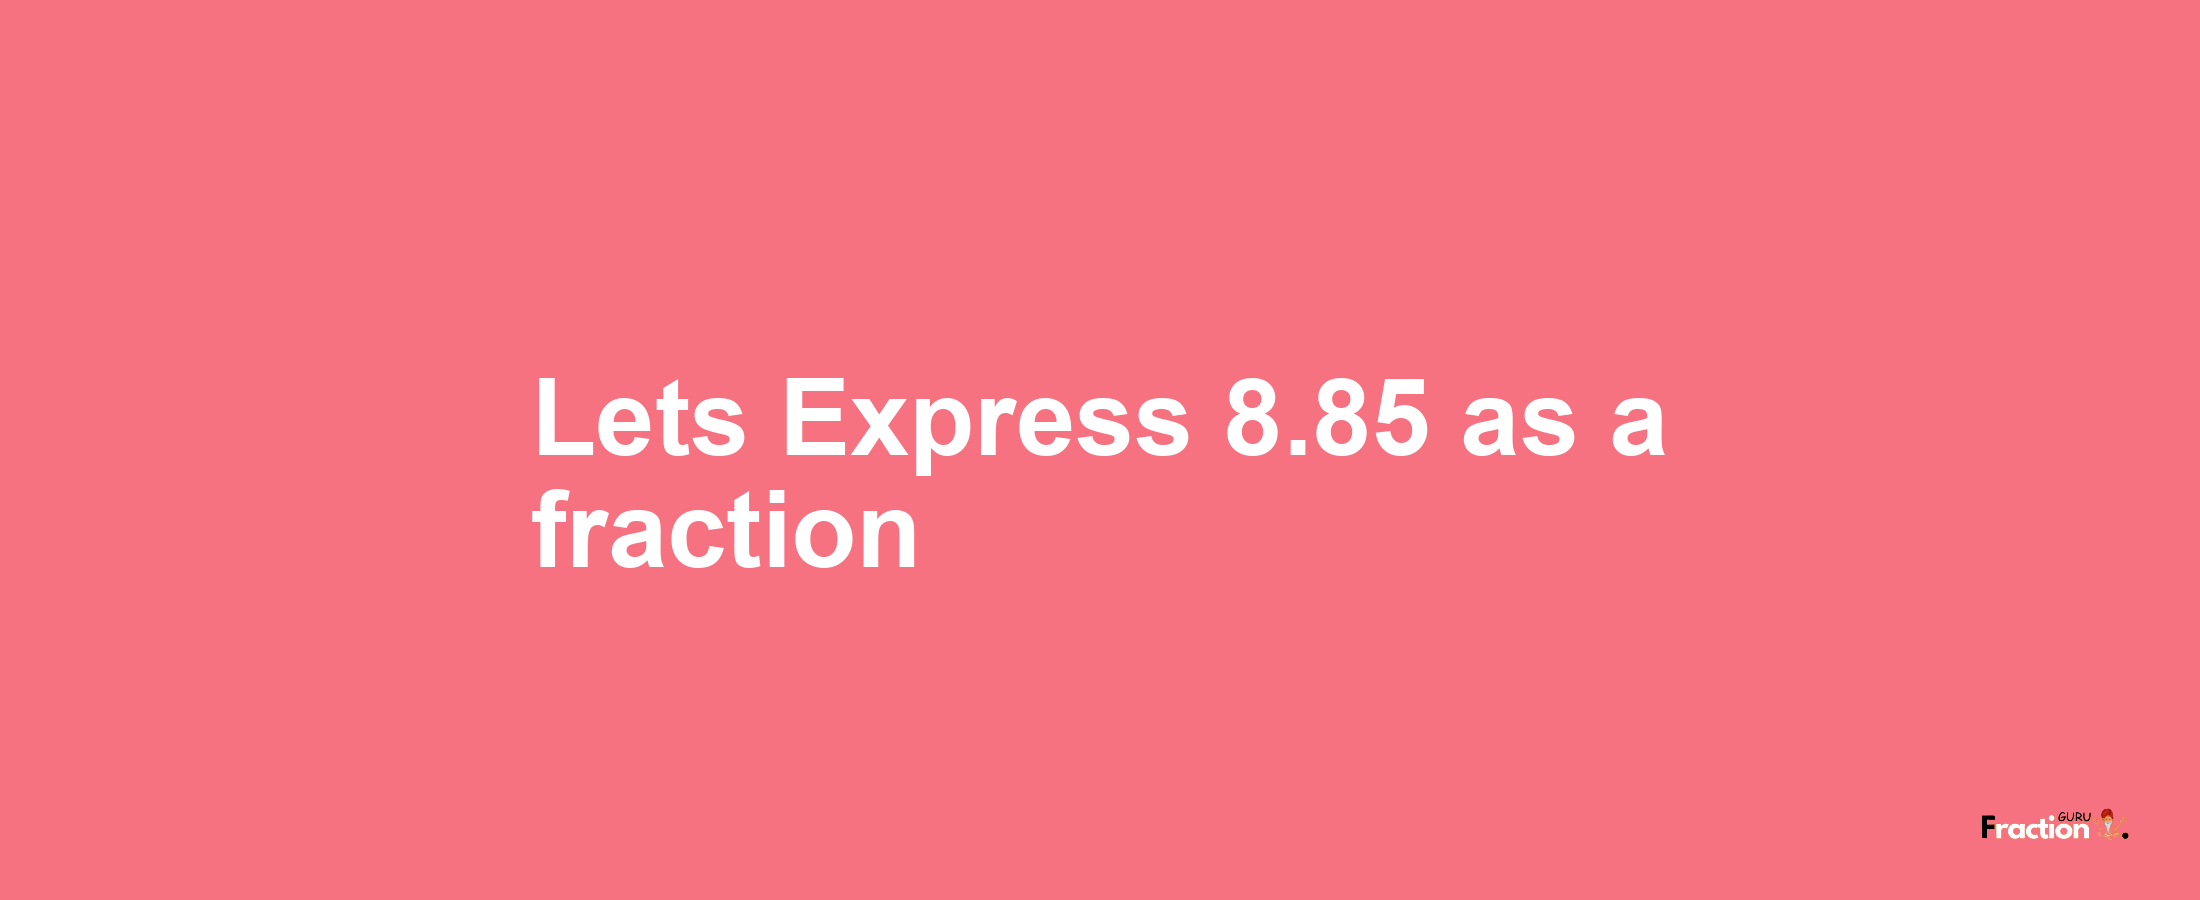 Lets Express 8.85 as afraction